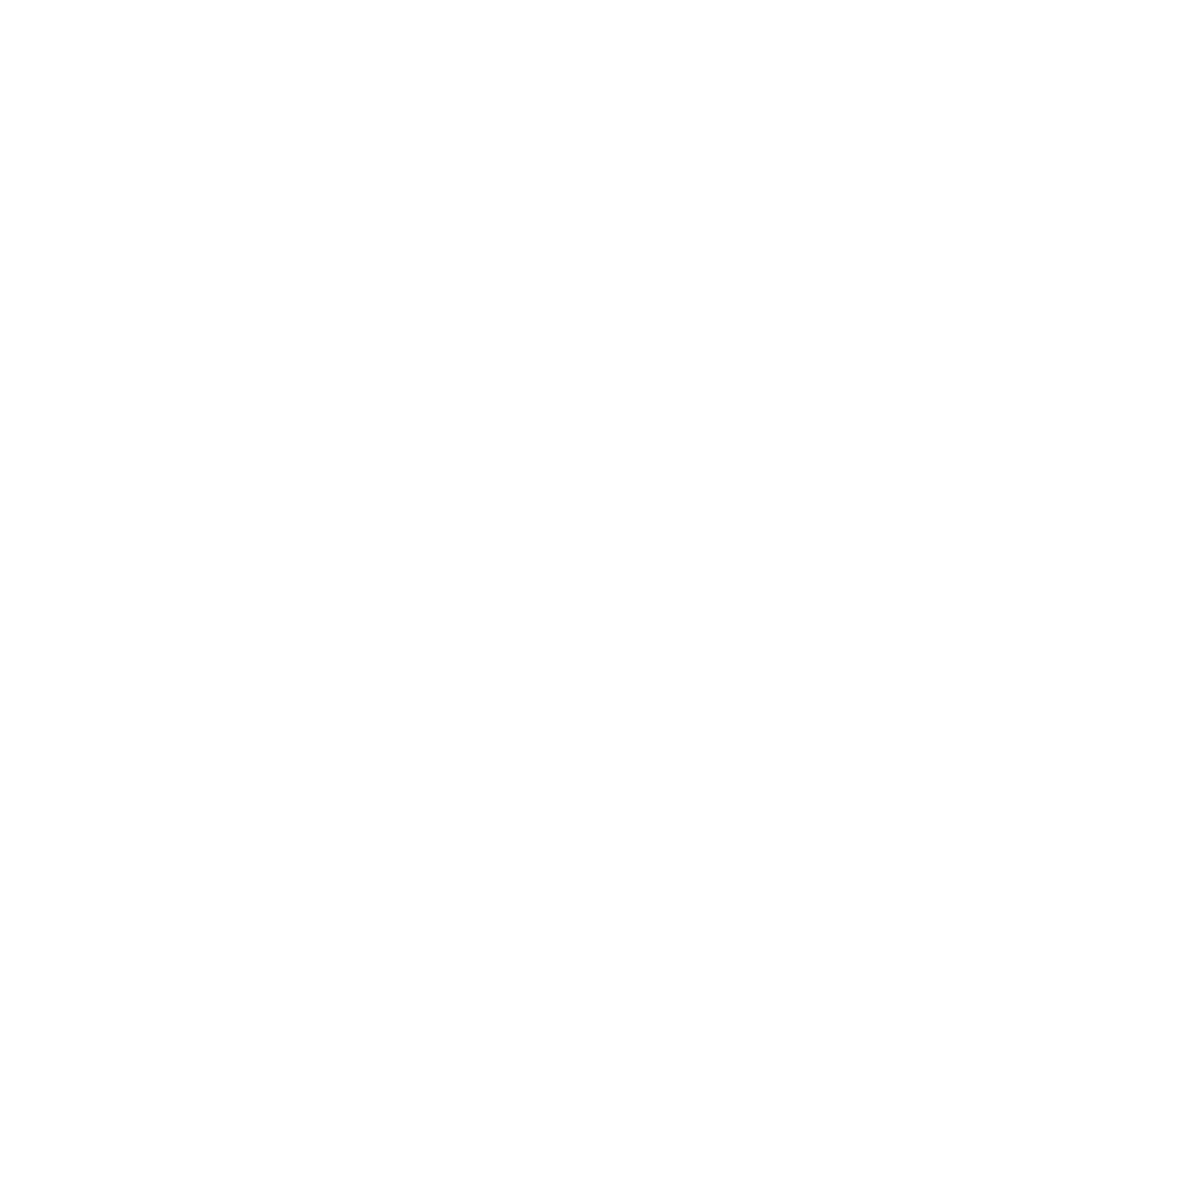 Office of Respondent Parents' Counsel of Colorado: Defending the Right to Parent since 2016.